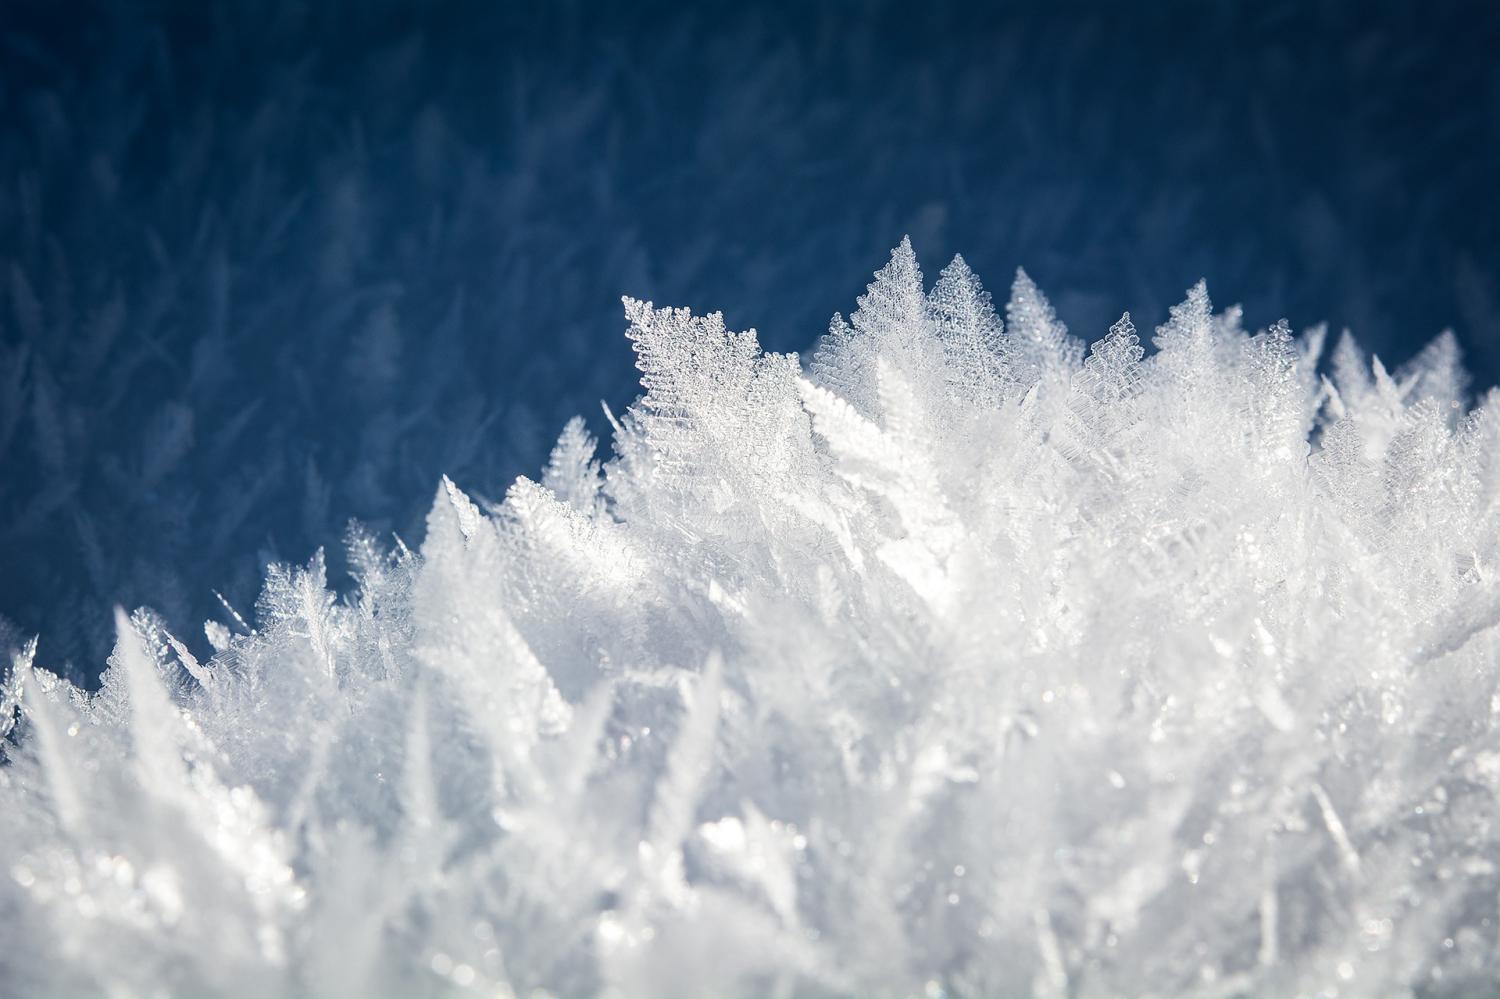 A new experiment hints at how hot water can freeze faster than cold